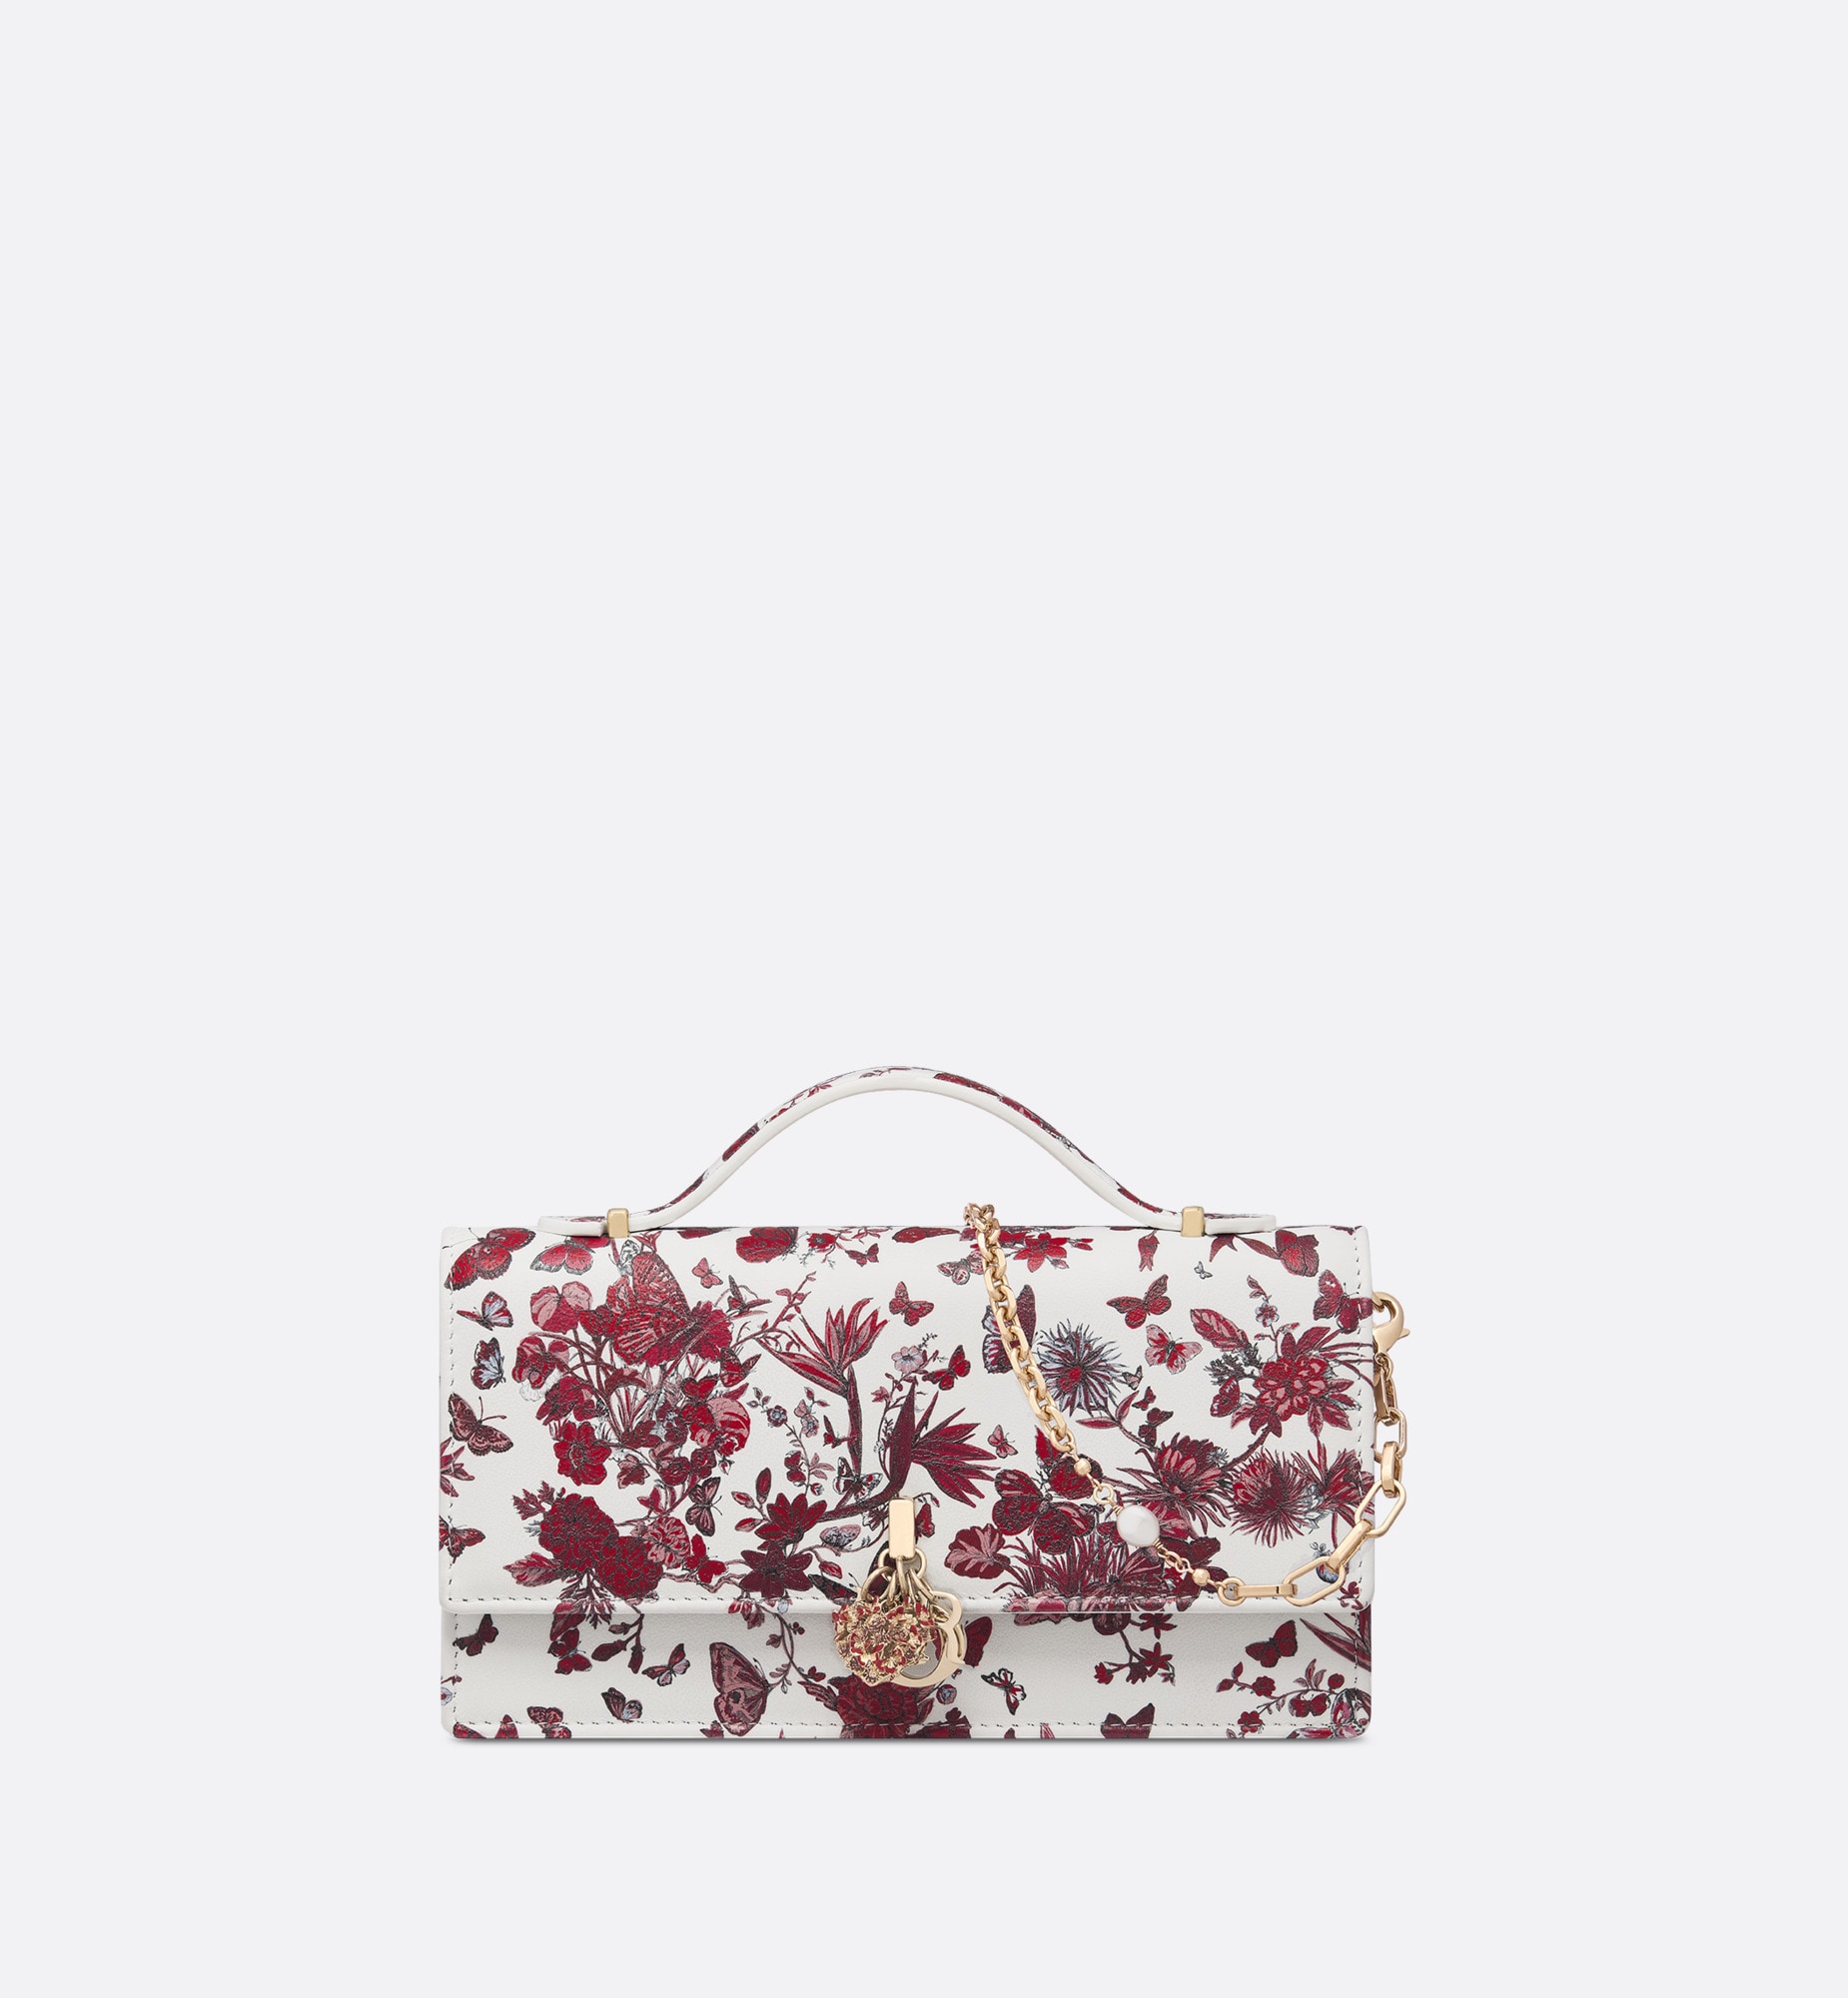 Miss dior mini bag white and red calfskin with le cœur des papillons print